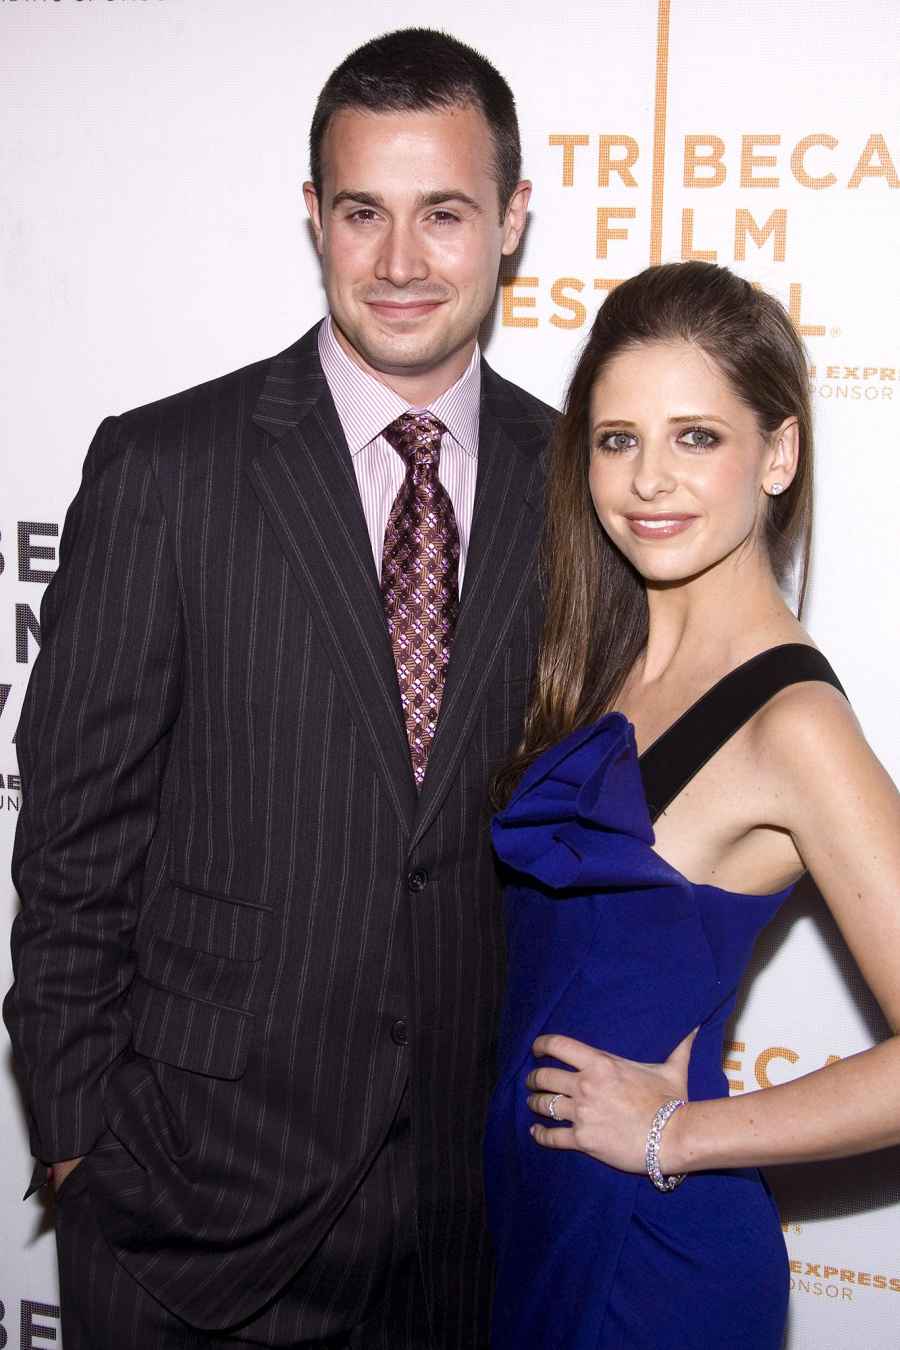 Freddie Prinze Jnr and Sarah Michelle Gellar Celebrities Who Started Dating After Years of Friendship